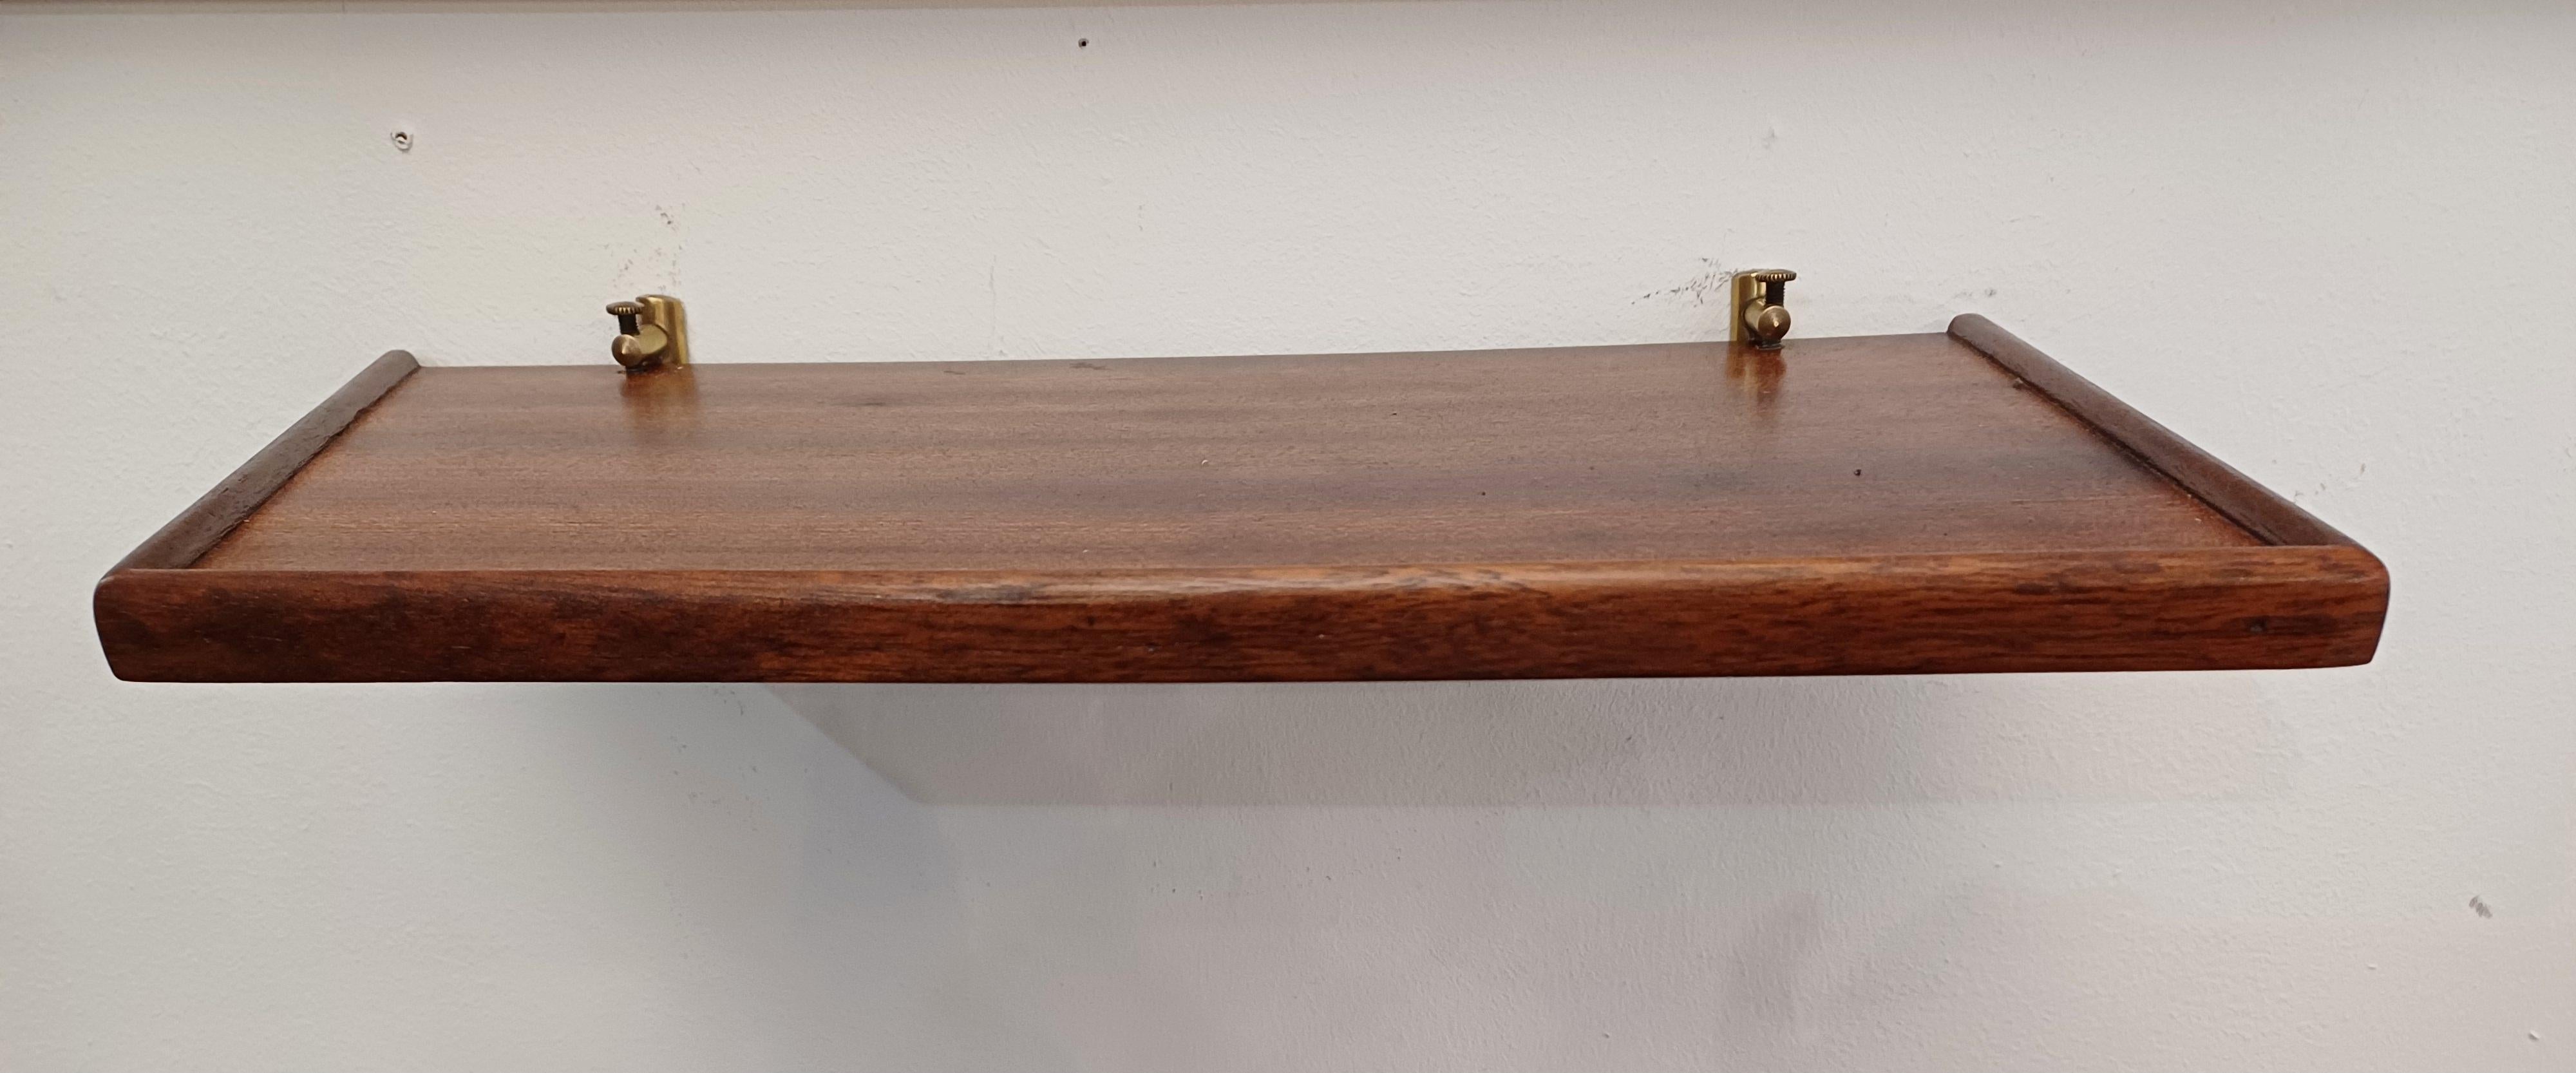 70s wall-mounted shelf/nightstand In Good Condition For Sale In Torino, Piemonte